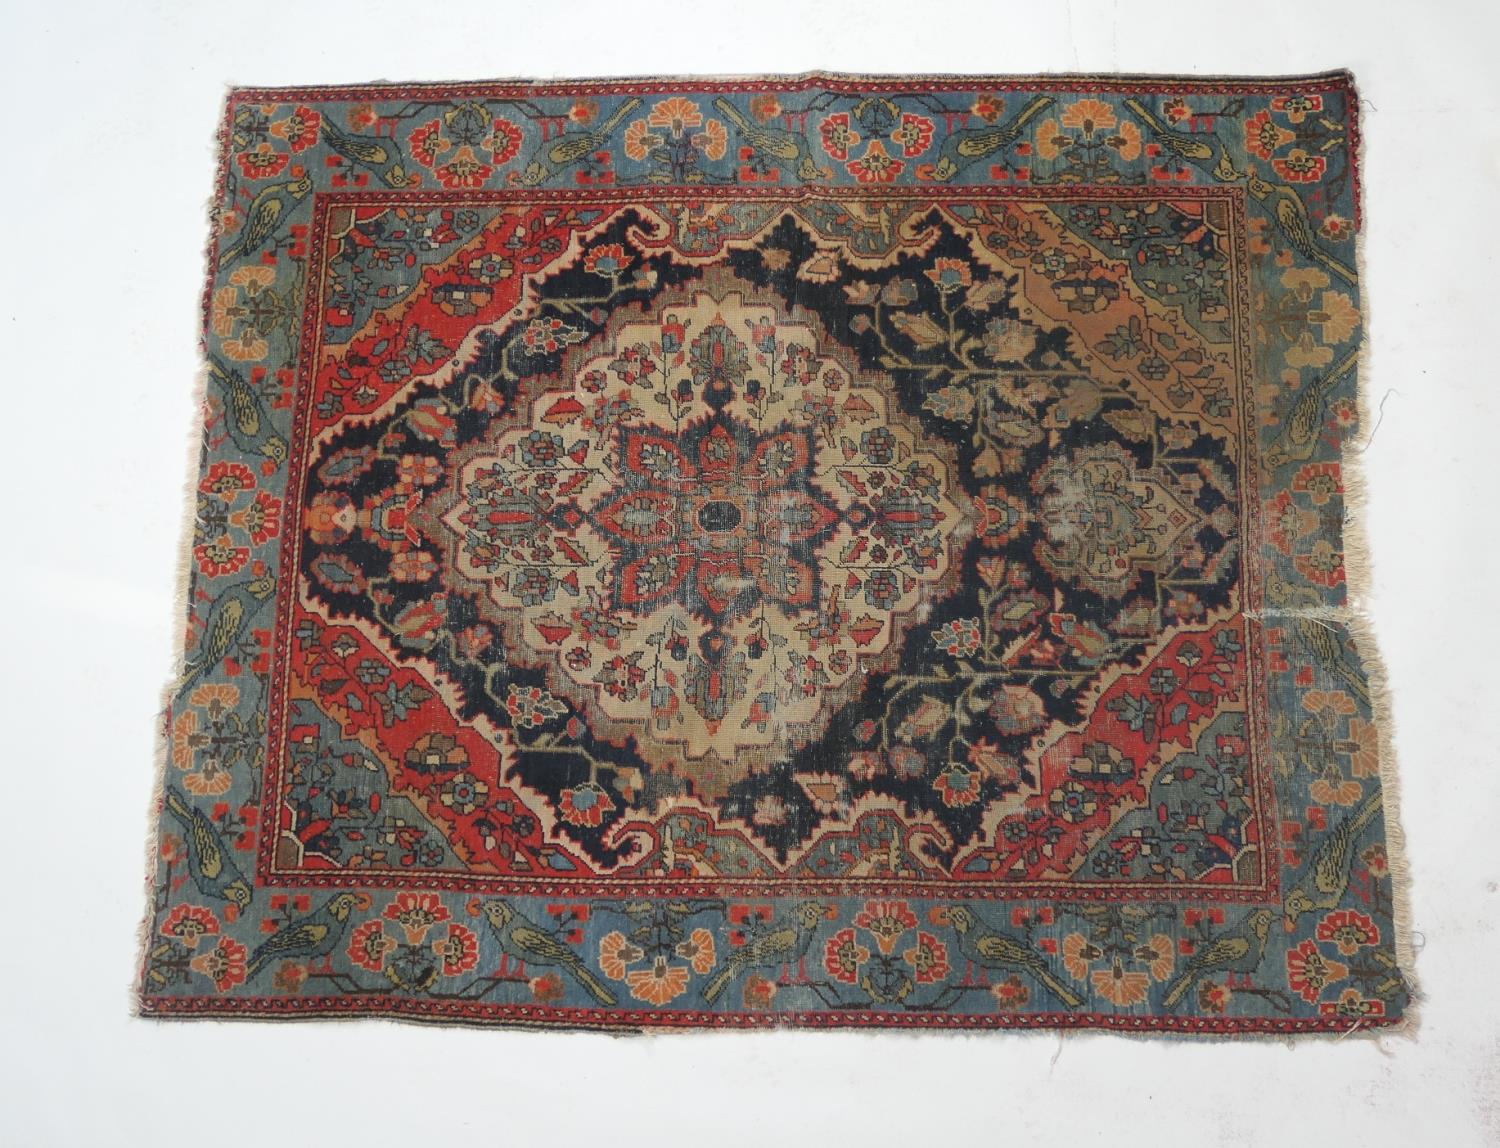 Persian Malayer woollen rug, late 19th Century, centred with a red flowerhead motif within a fawn